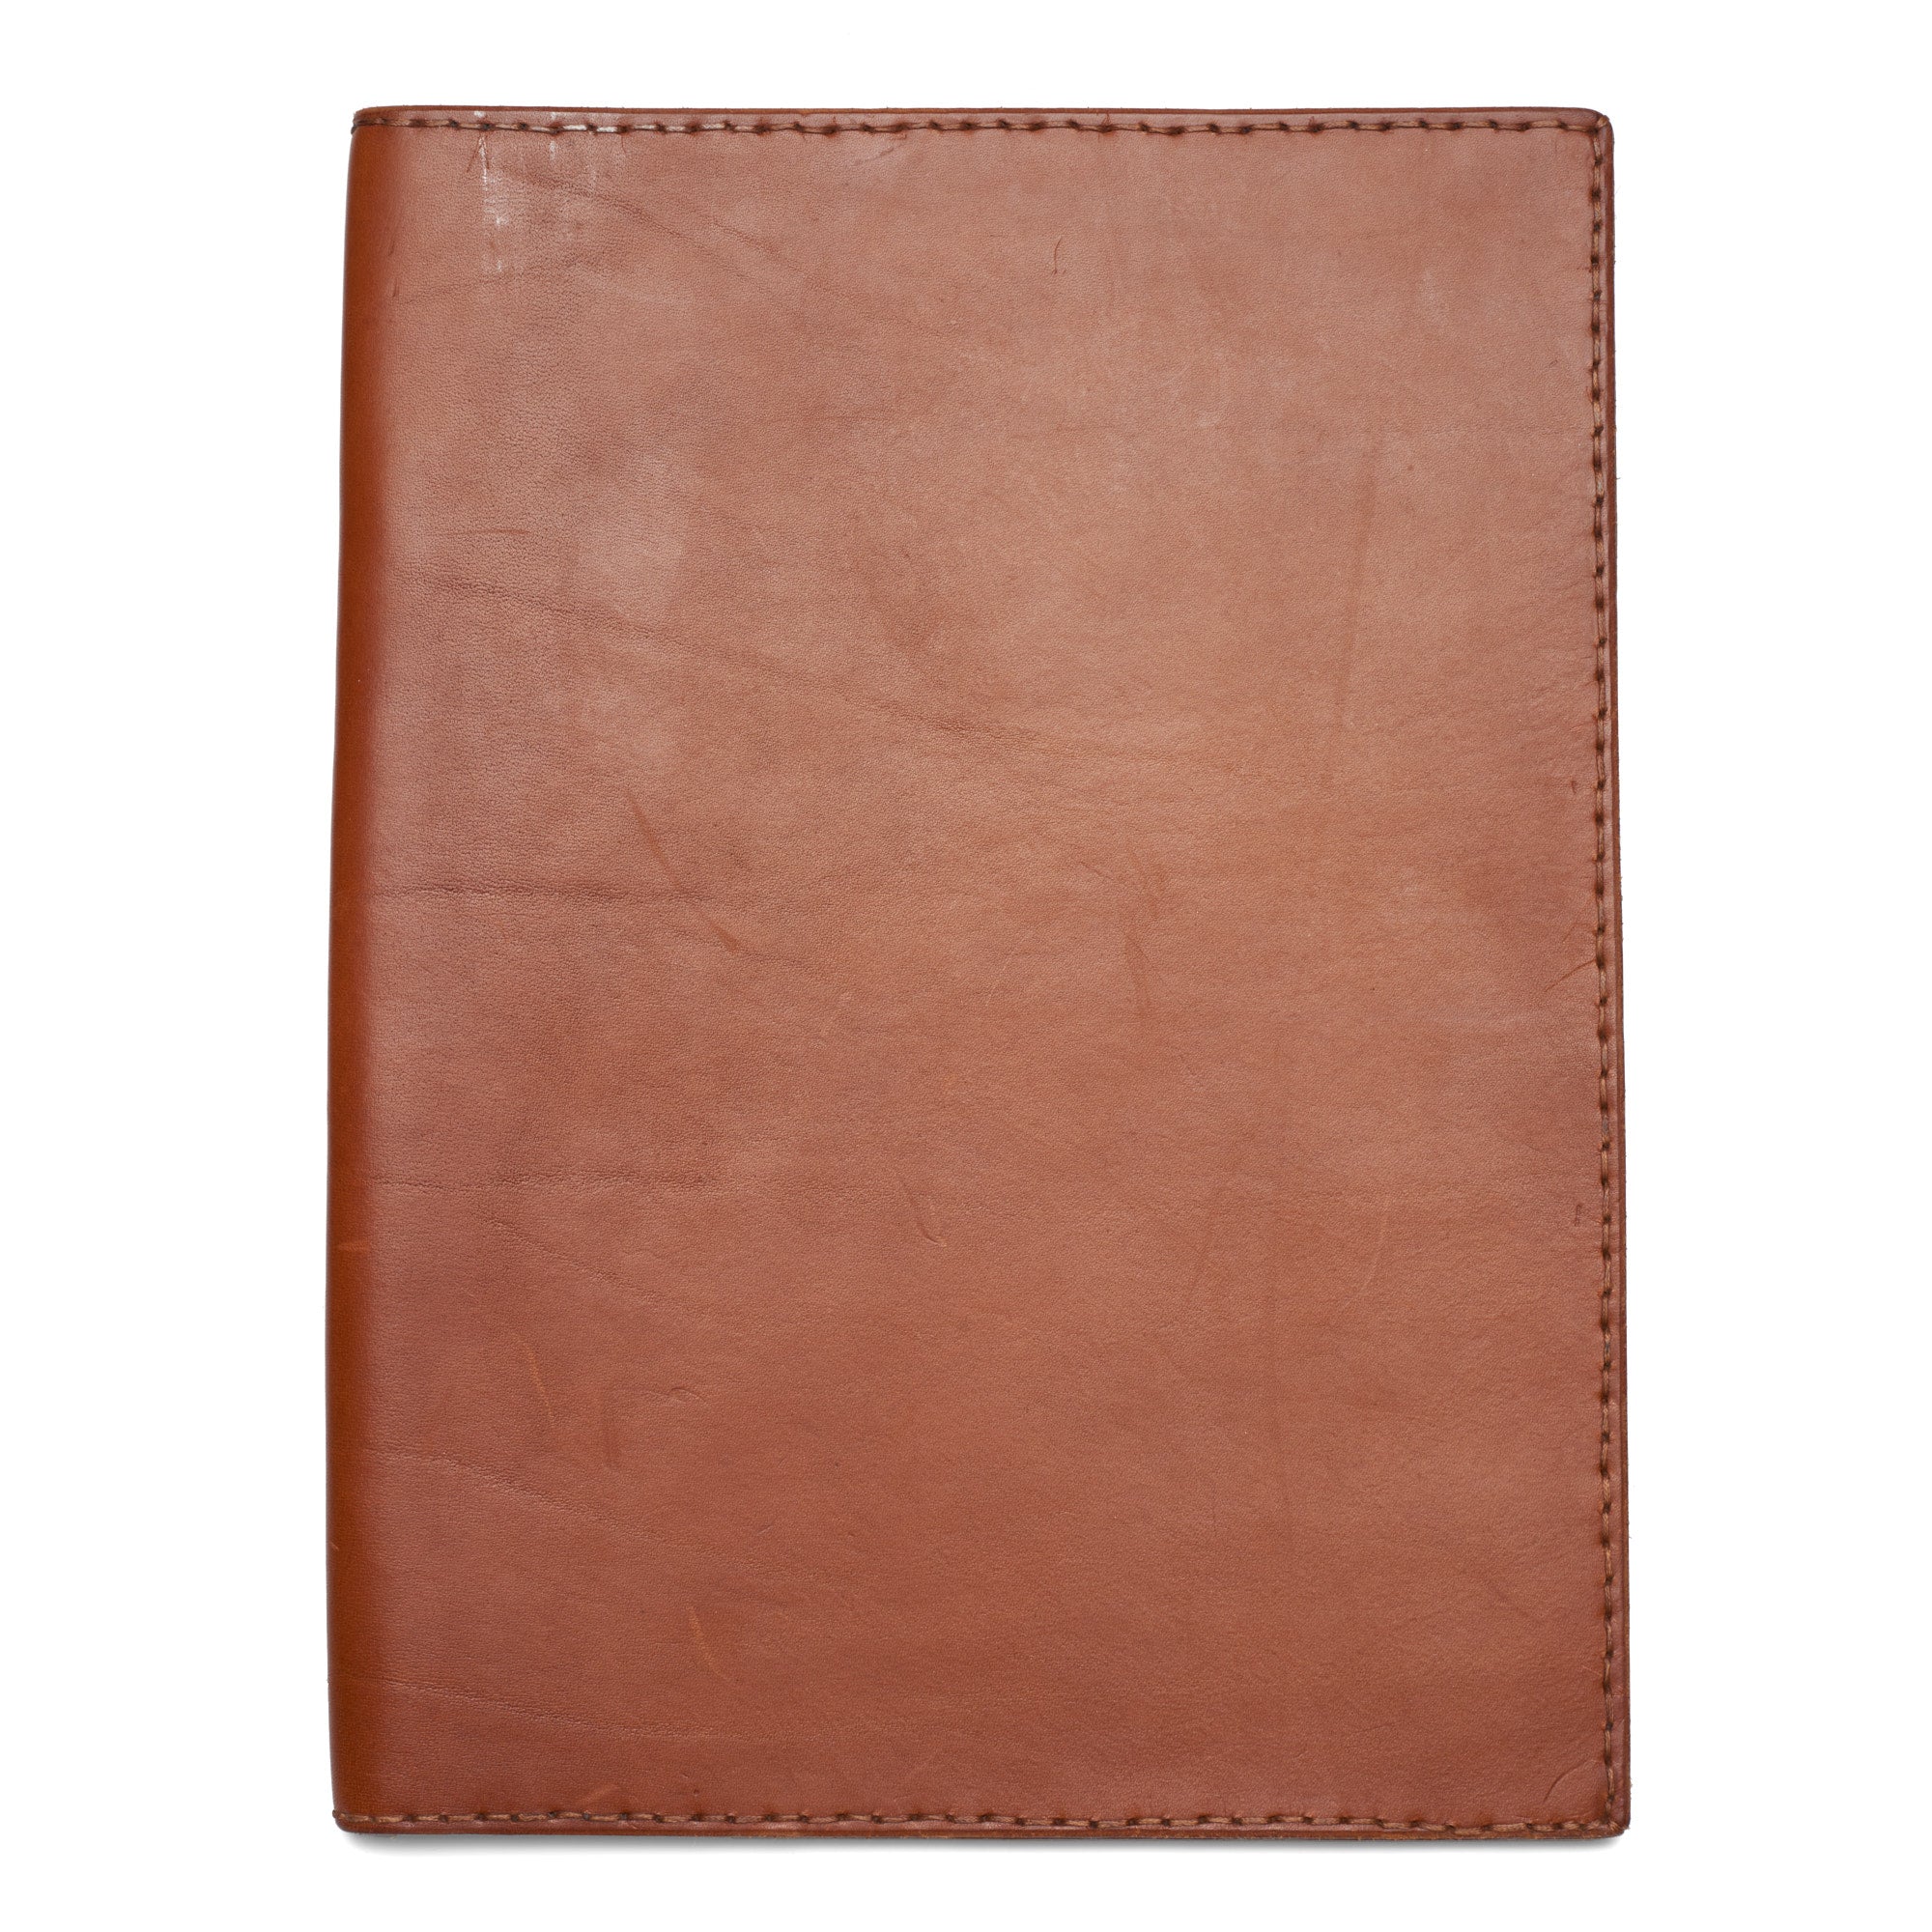 OLD HIDE ROMANELLI Cowhide Leather Notepad Cover Folio 32x24